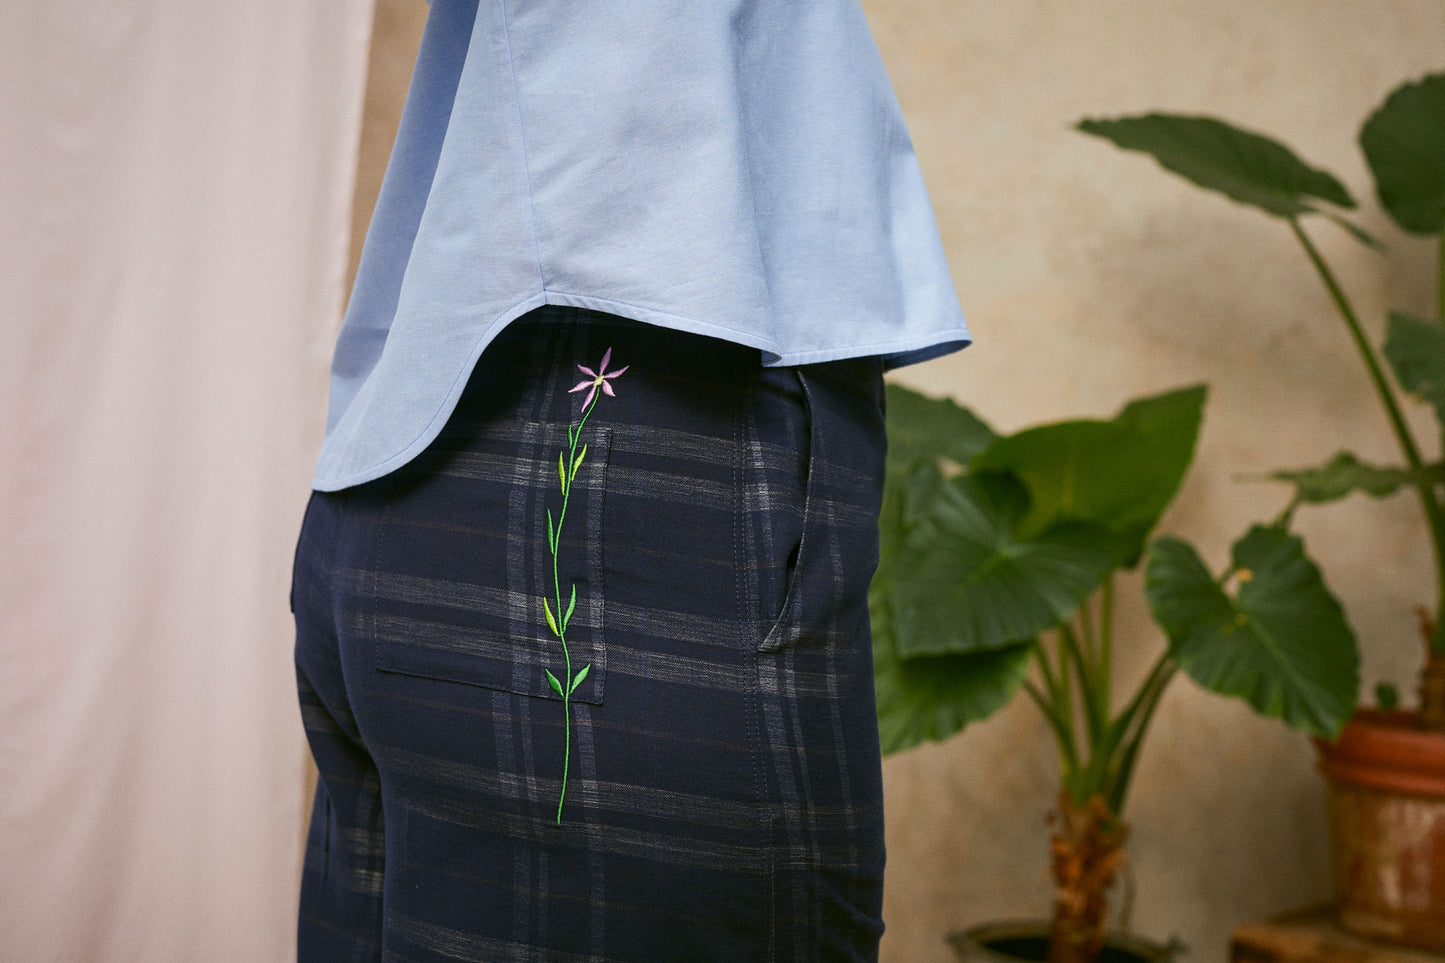 Close up side view of Saywood's Amelia check trousers, wide leg culotte shape in navy check. The lilac flower embroidery is visible on the back patch pocket. Worn with the pale blue shirt, the Marie a-line blouse. A plant and drop of pink fabric can be seen in the background.